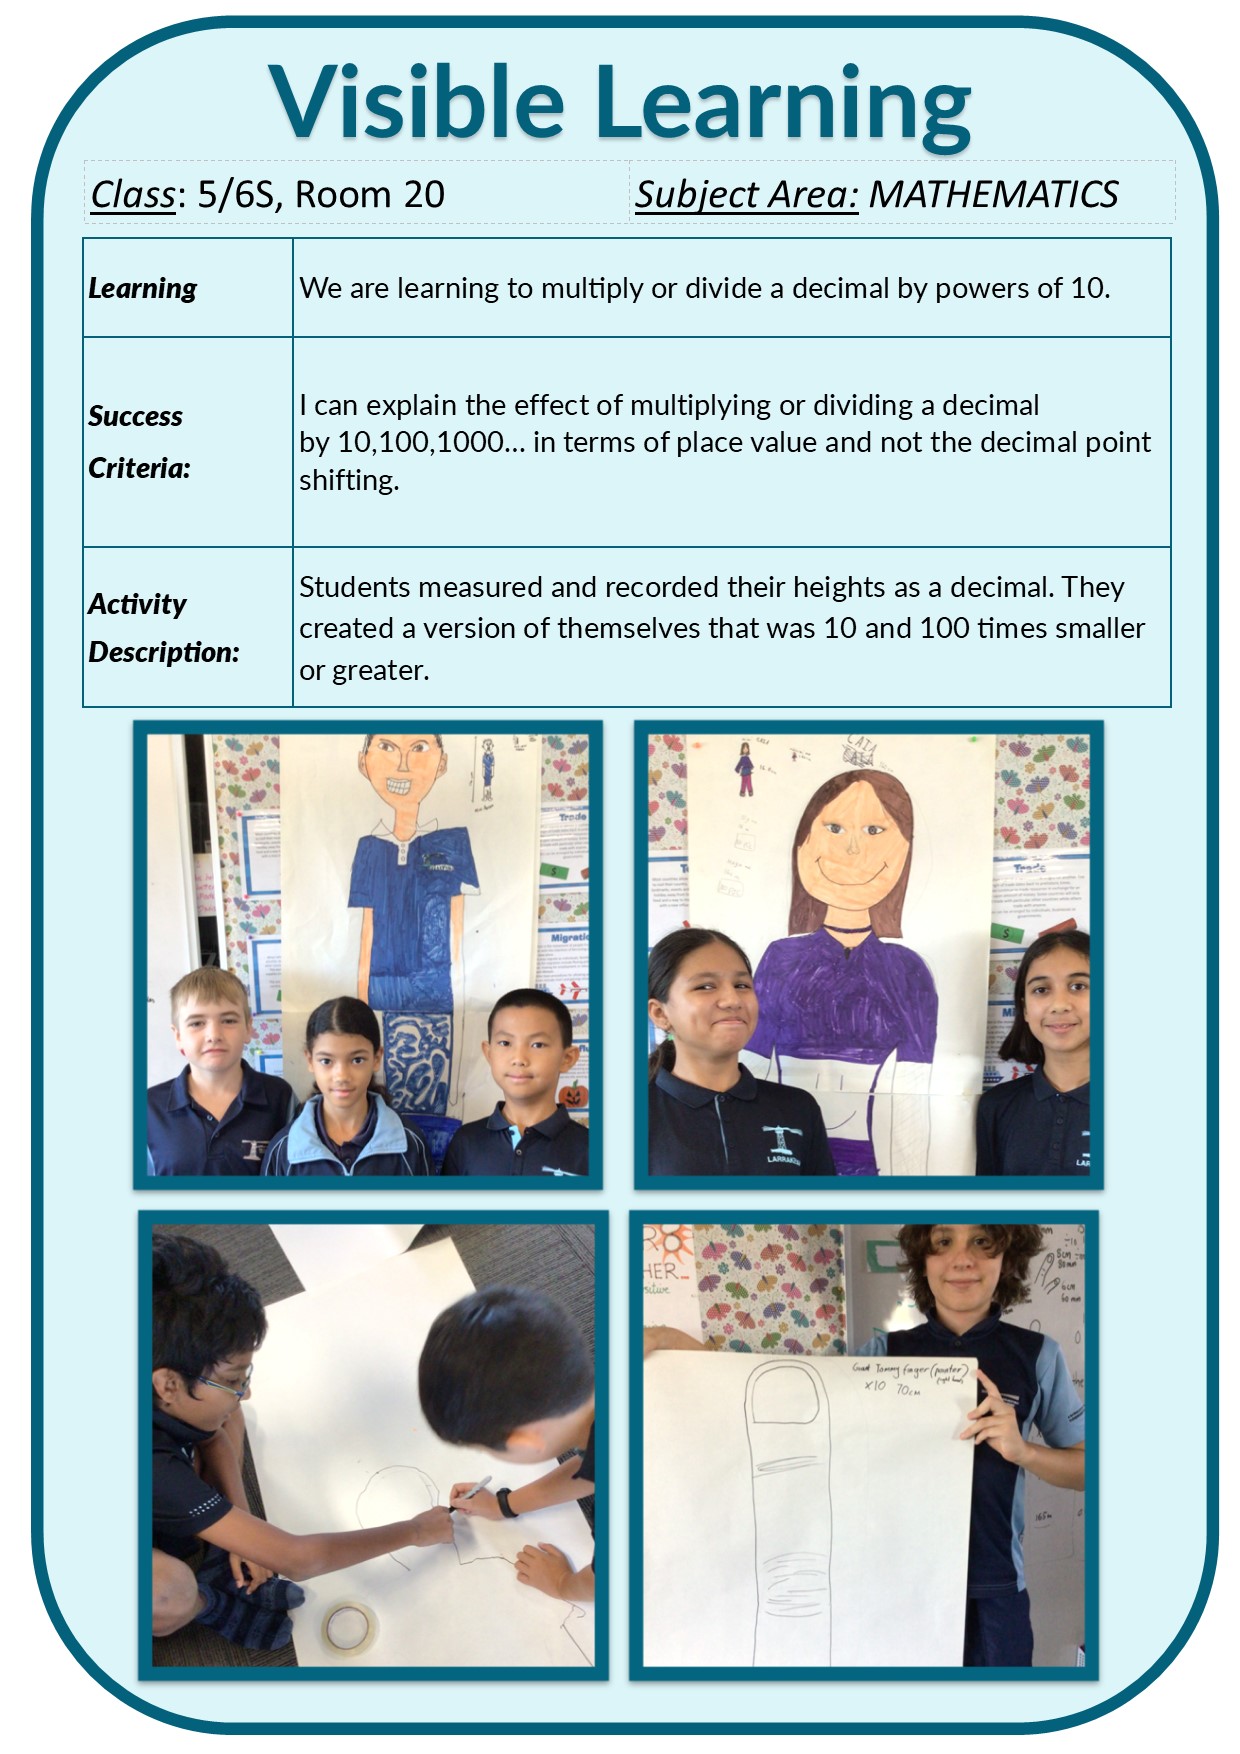 Visible Learning/5 6 S Week 6 Term 2 Mathematics pub replacement.jpg